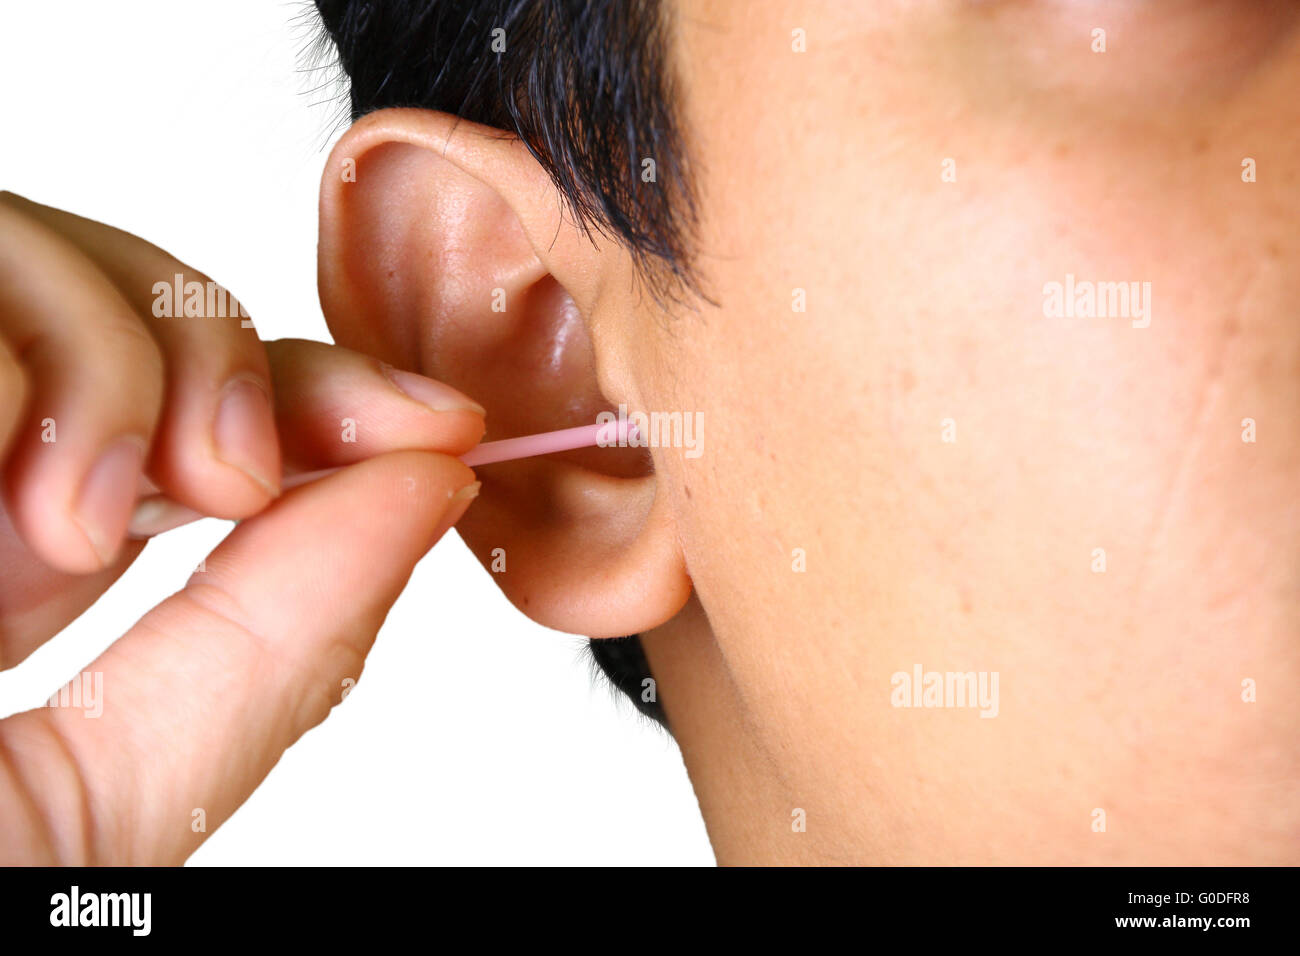 Young Asian man cleaning his ear with cotton bud Stock Photo